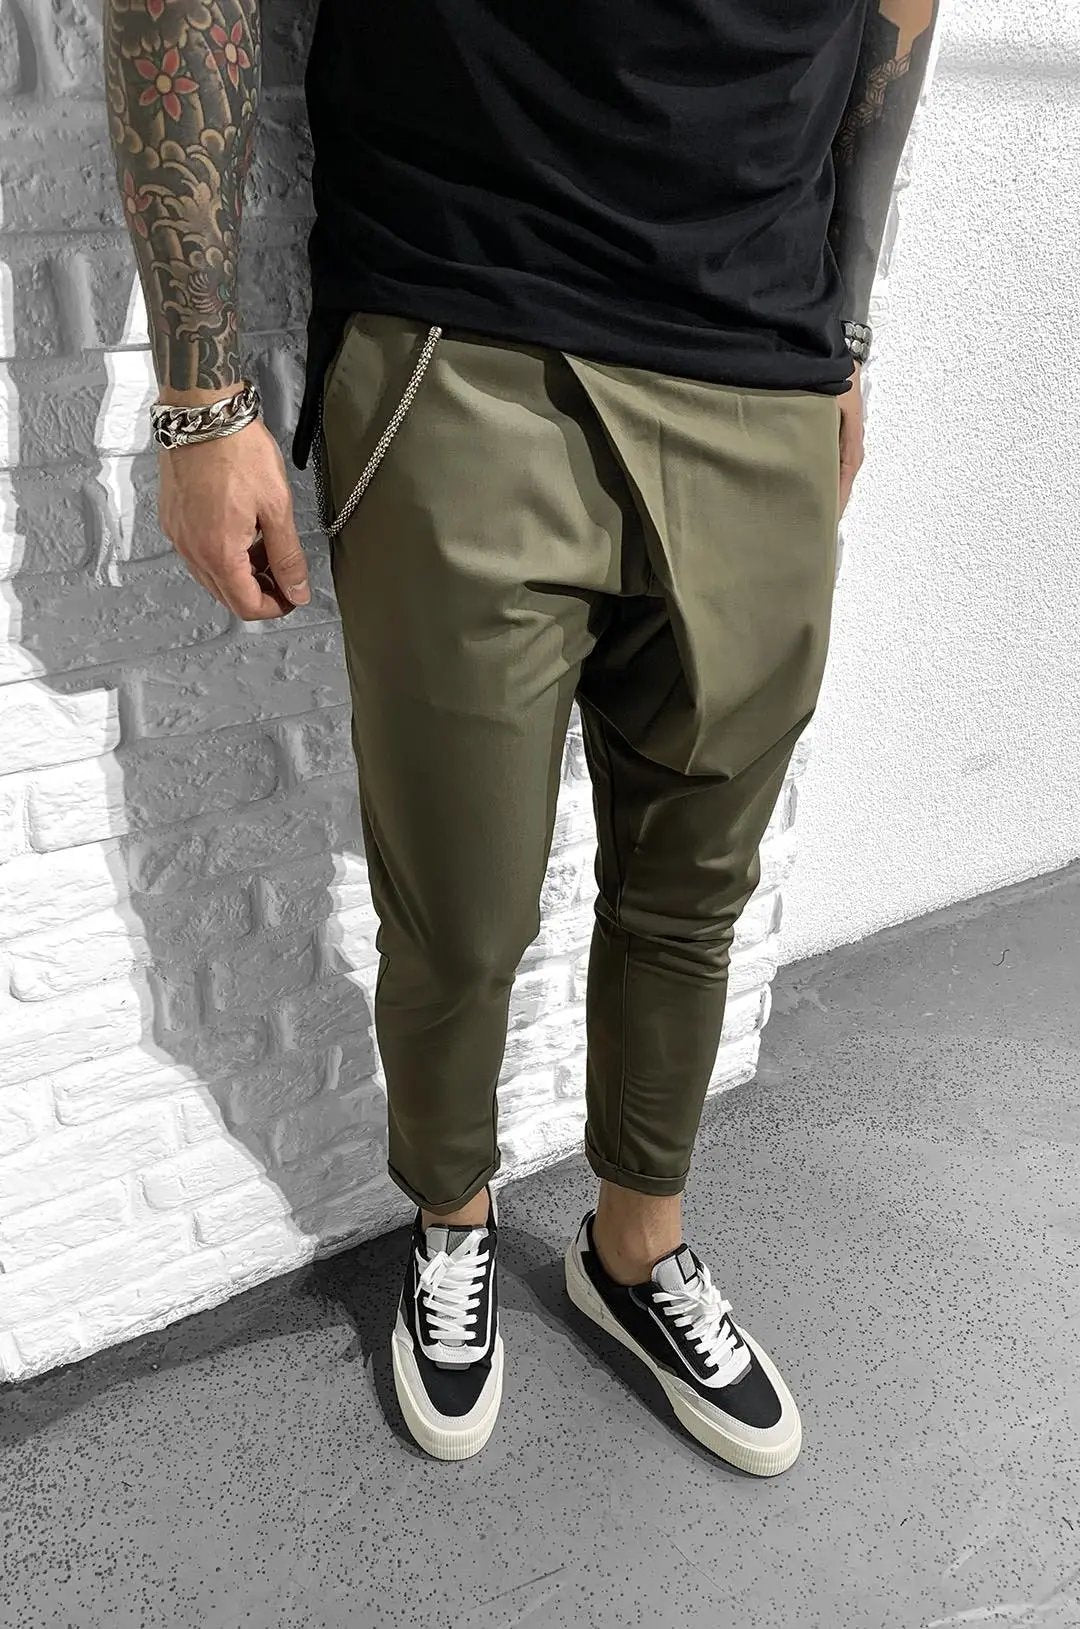 A man with tattoos is standing next to a wall, wearing clothes made from ASSYMMETRIC ROLL UP - KHAKI fabric for a comfortable fit and smooth feel.